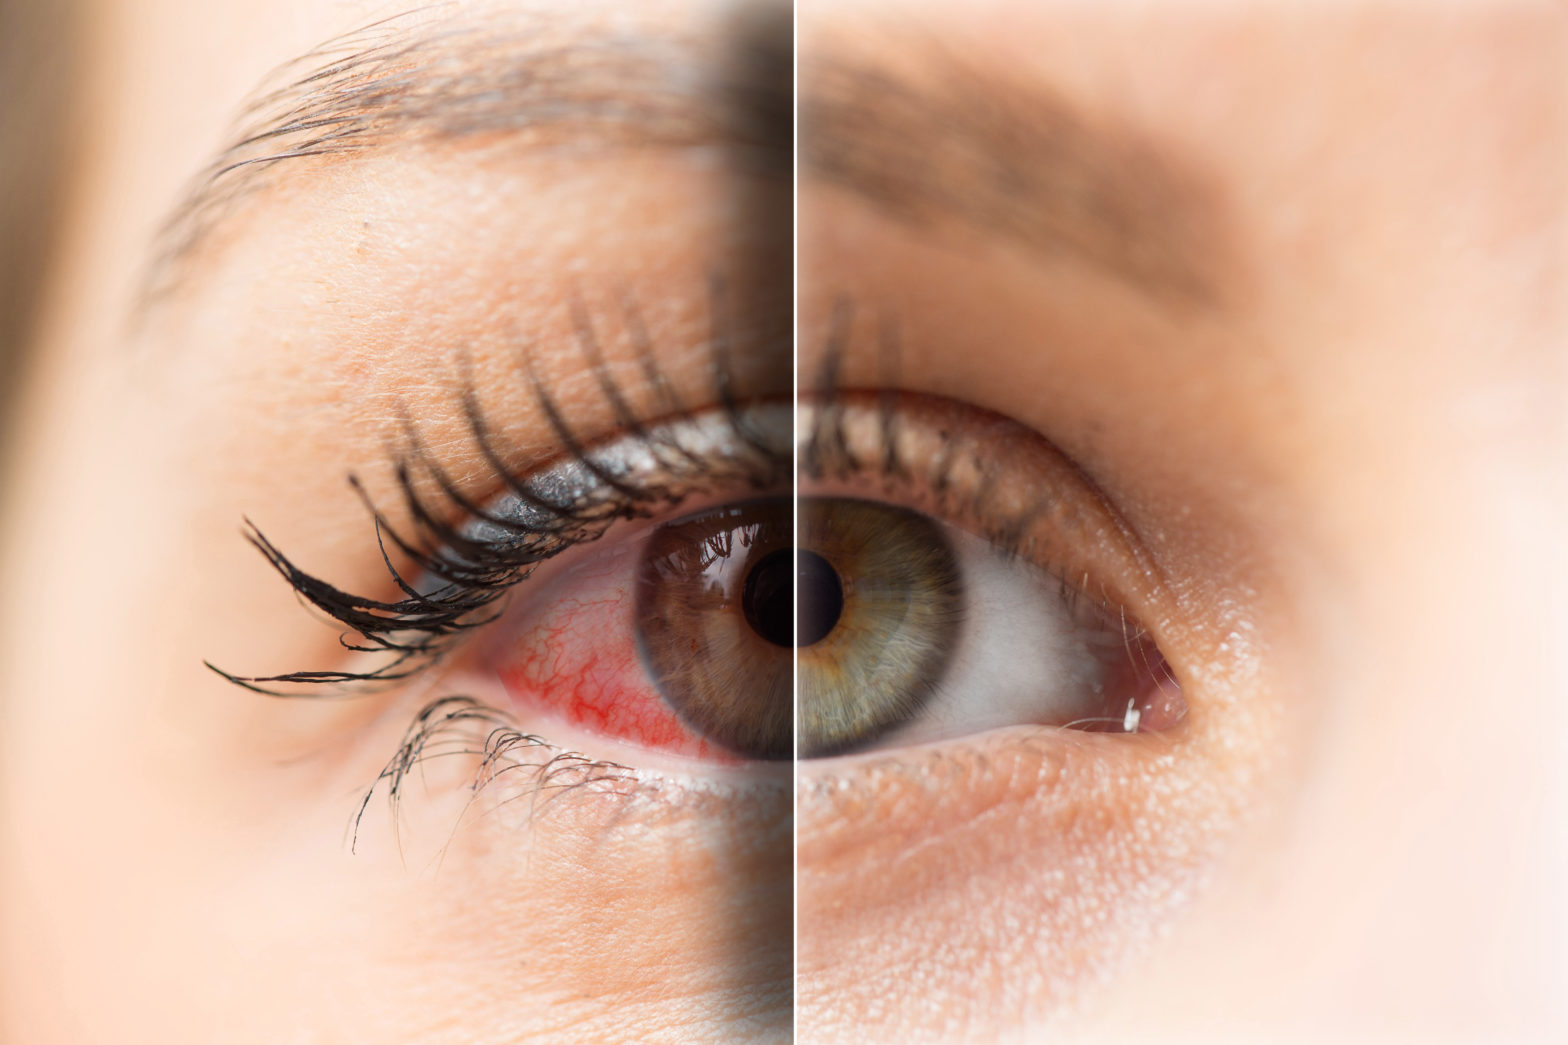 Understanding the Early Warning Signs and Symptoms of Glaucoma